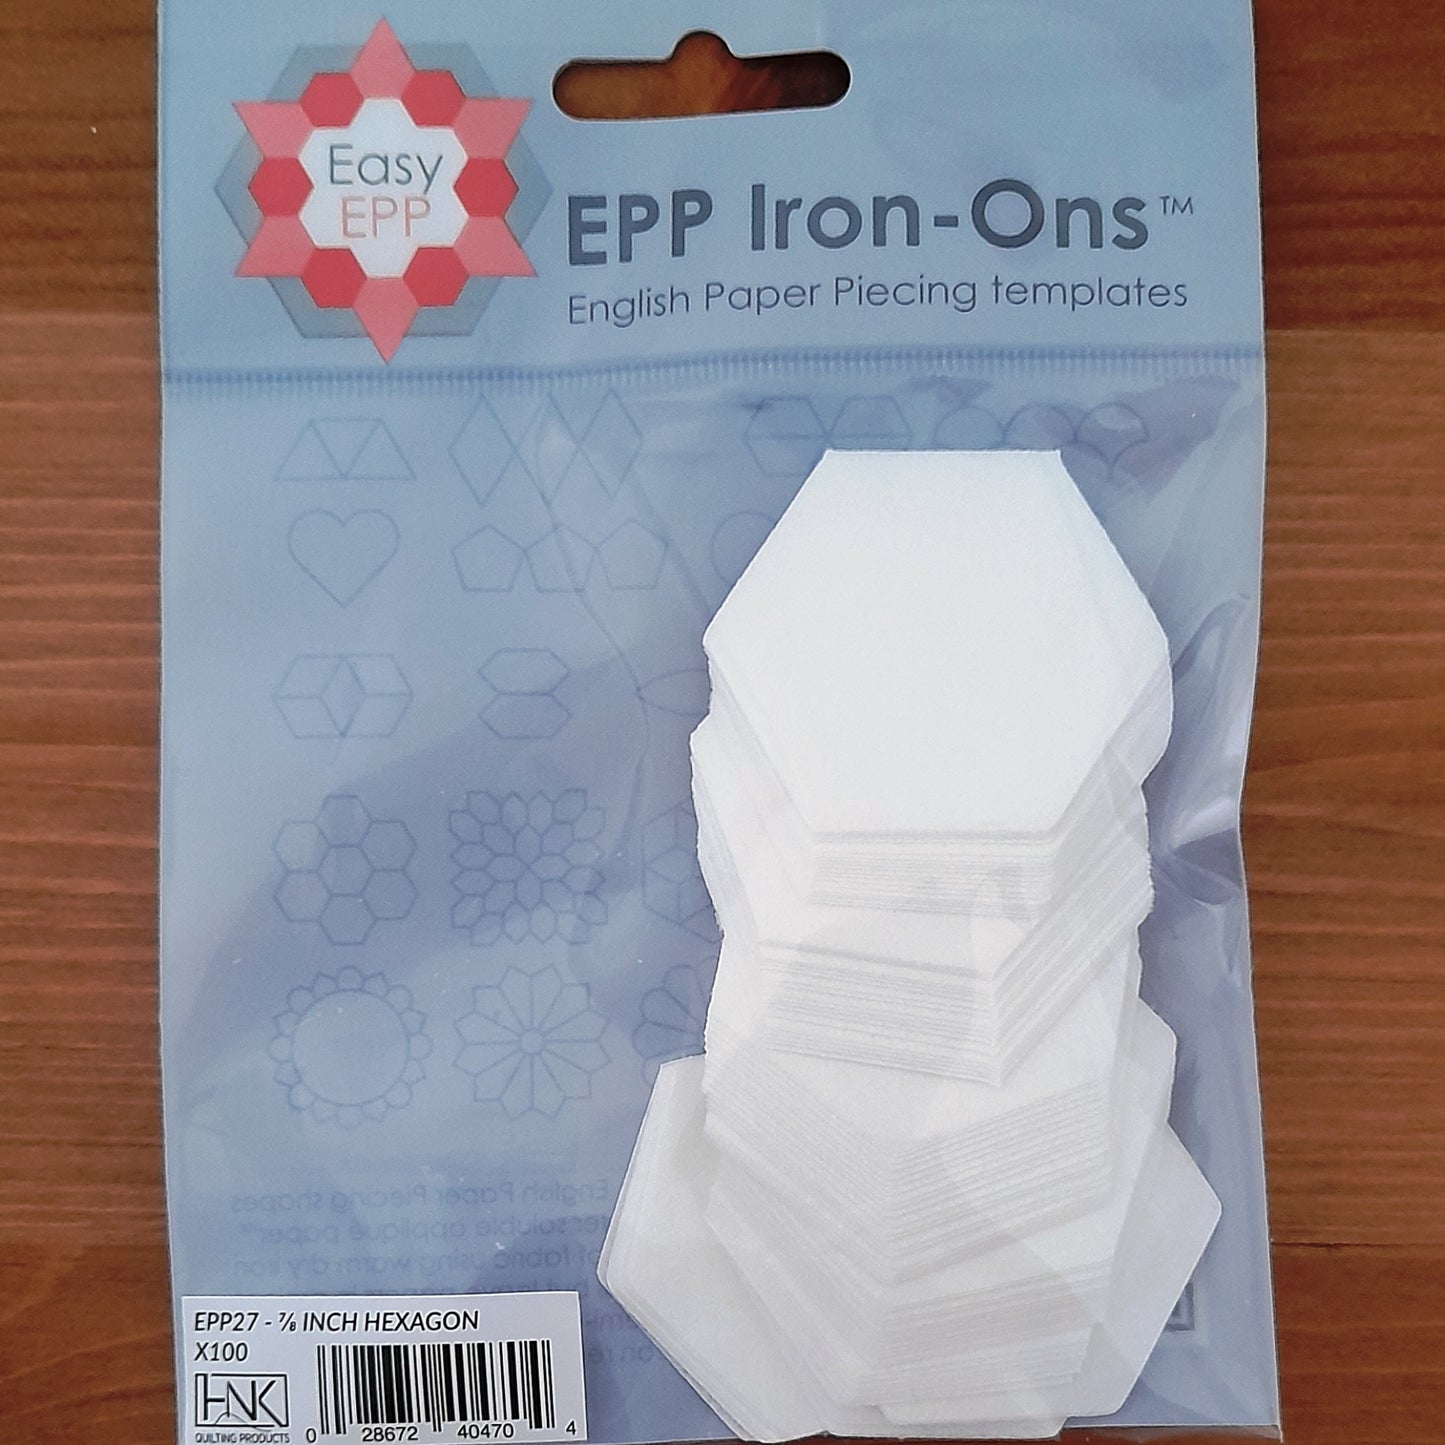 Hexagons 7/8", 100 fusible iron on papers for EPP English Paper Piecing Hugs n Kisses